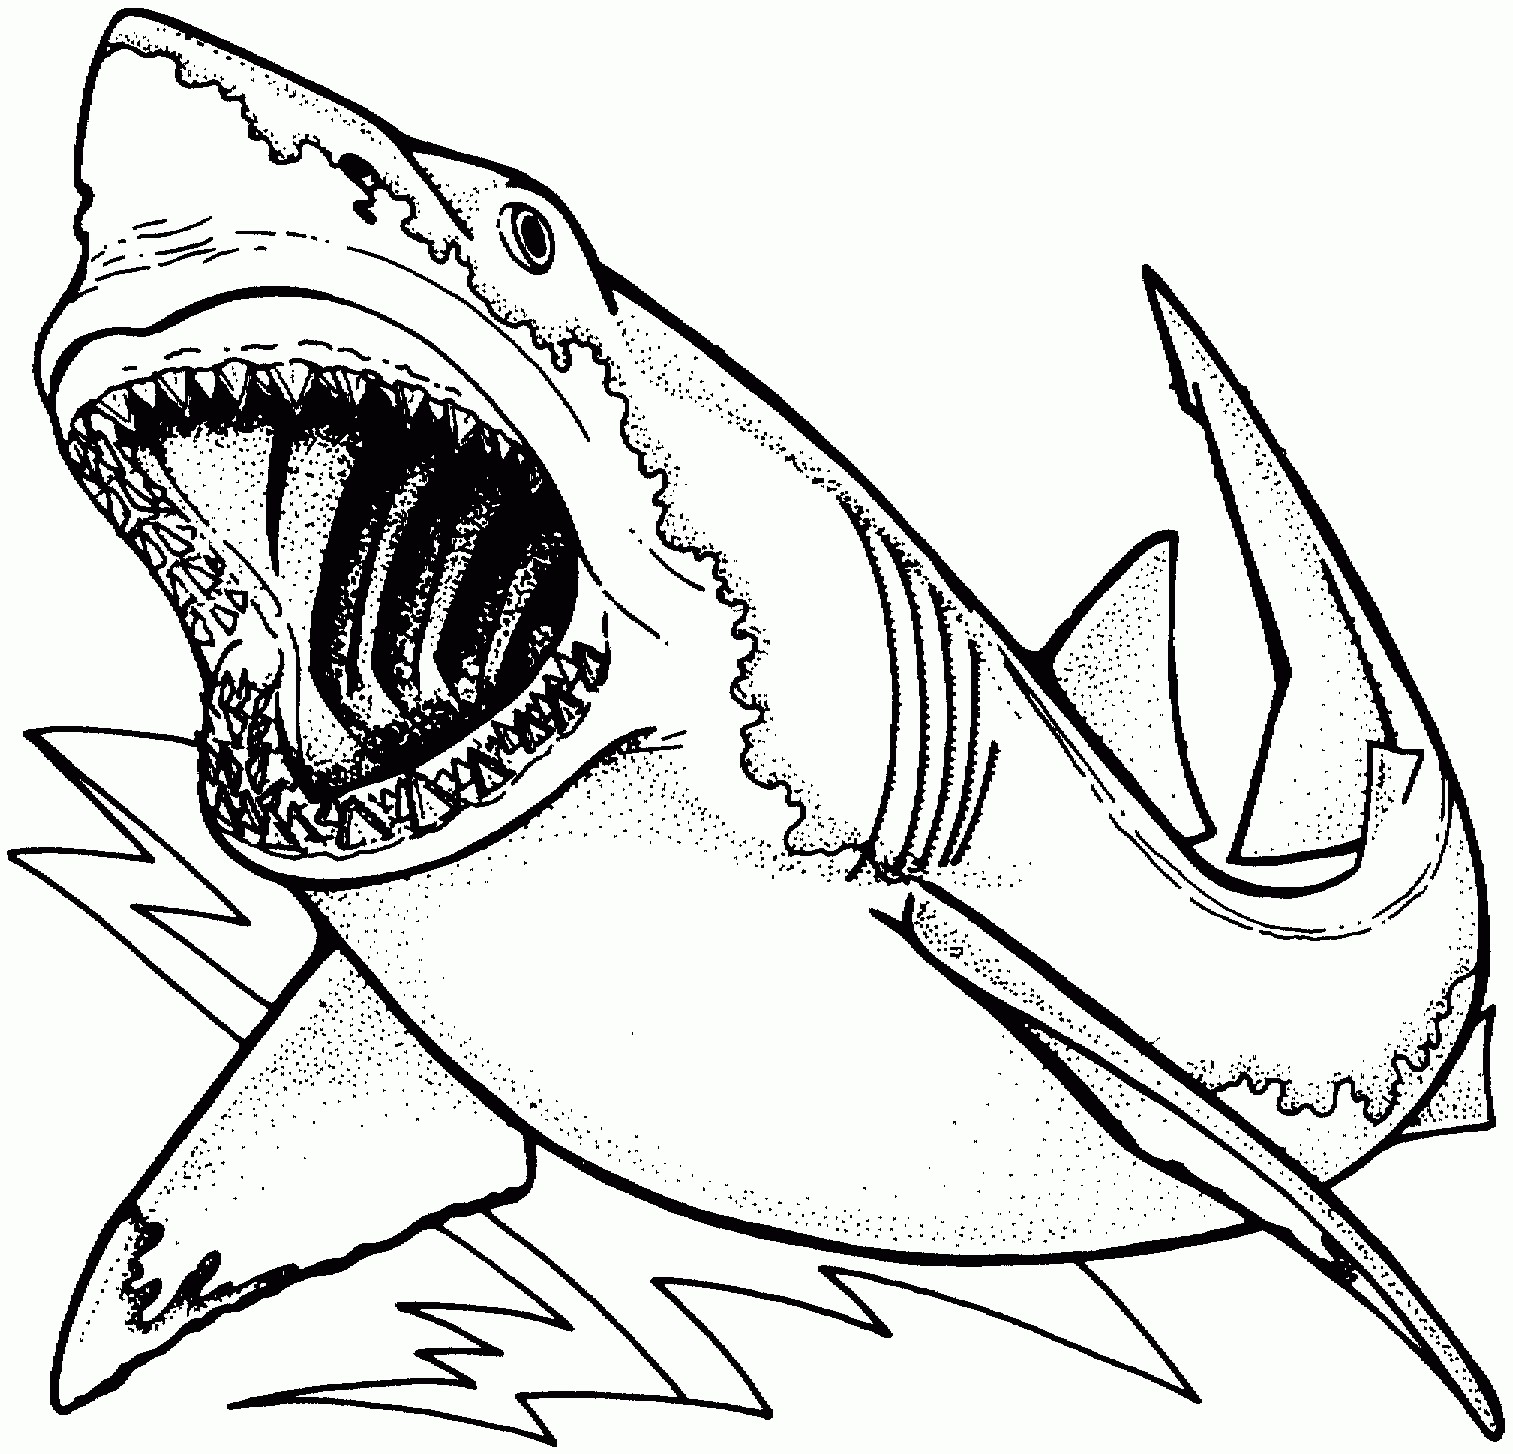 Awesome Great White Shark Coloring Page - Free Printable Coloring Pages ...